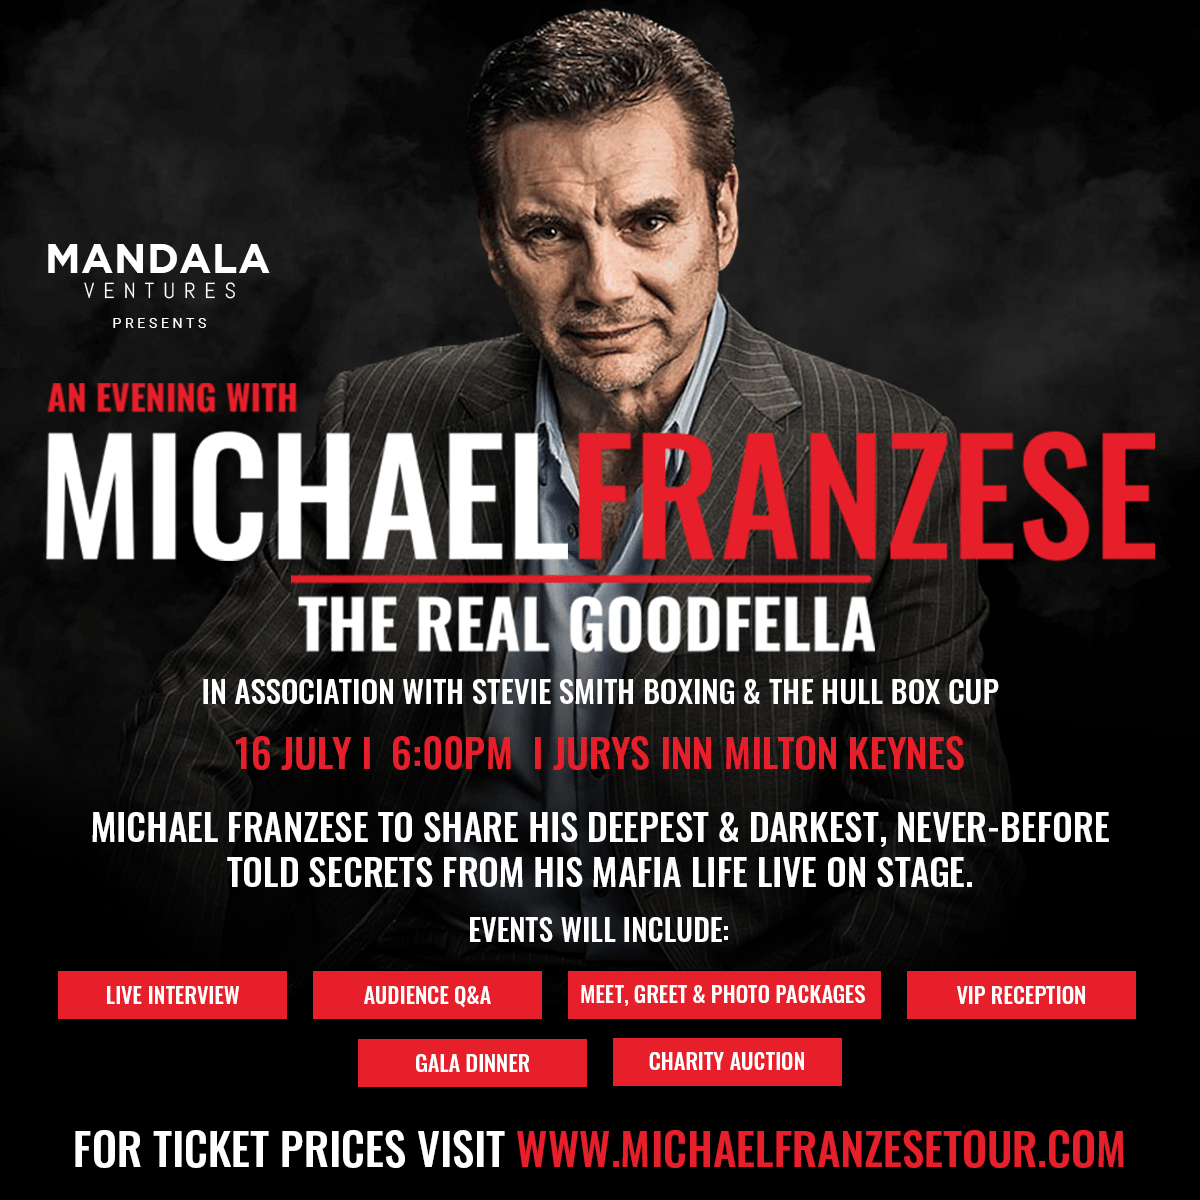 Milton Keynes to host ‘An Evening with Michael Franzese – The Real Goodfella’